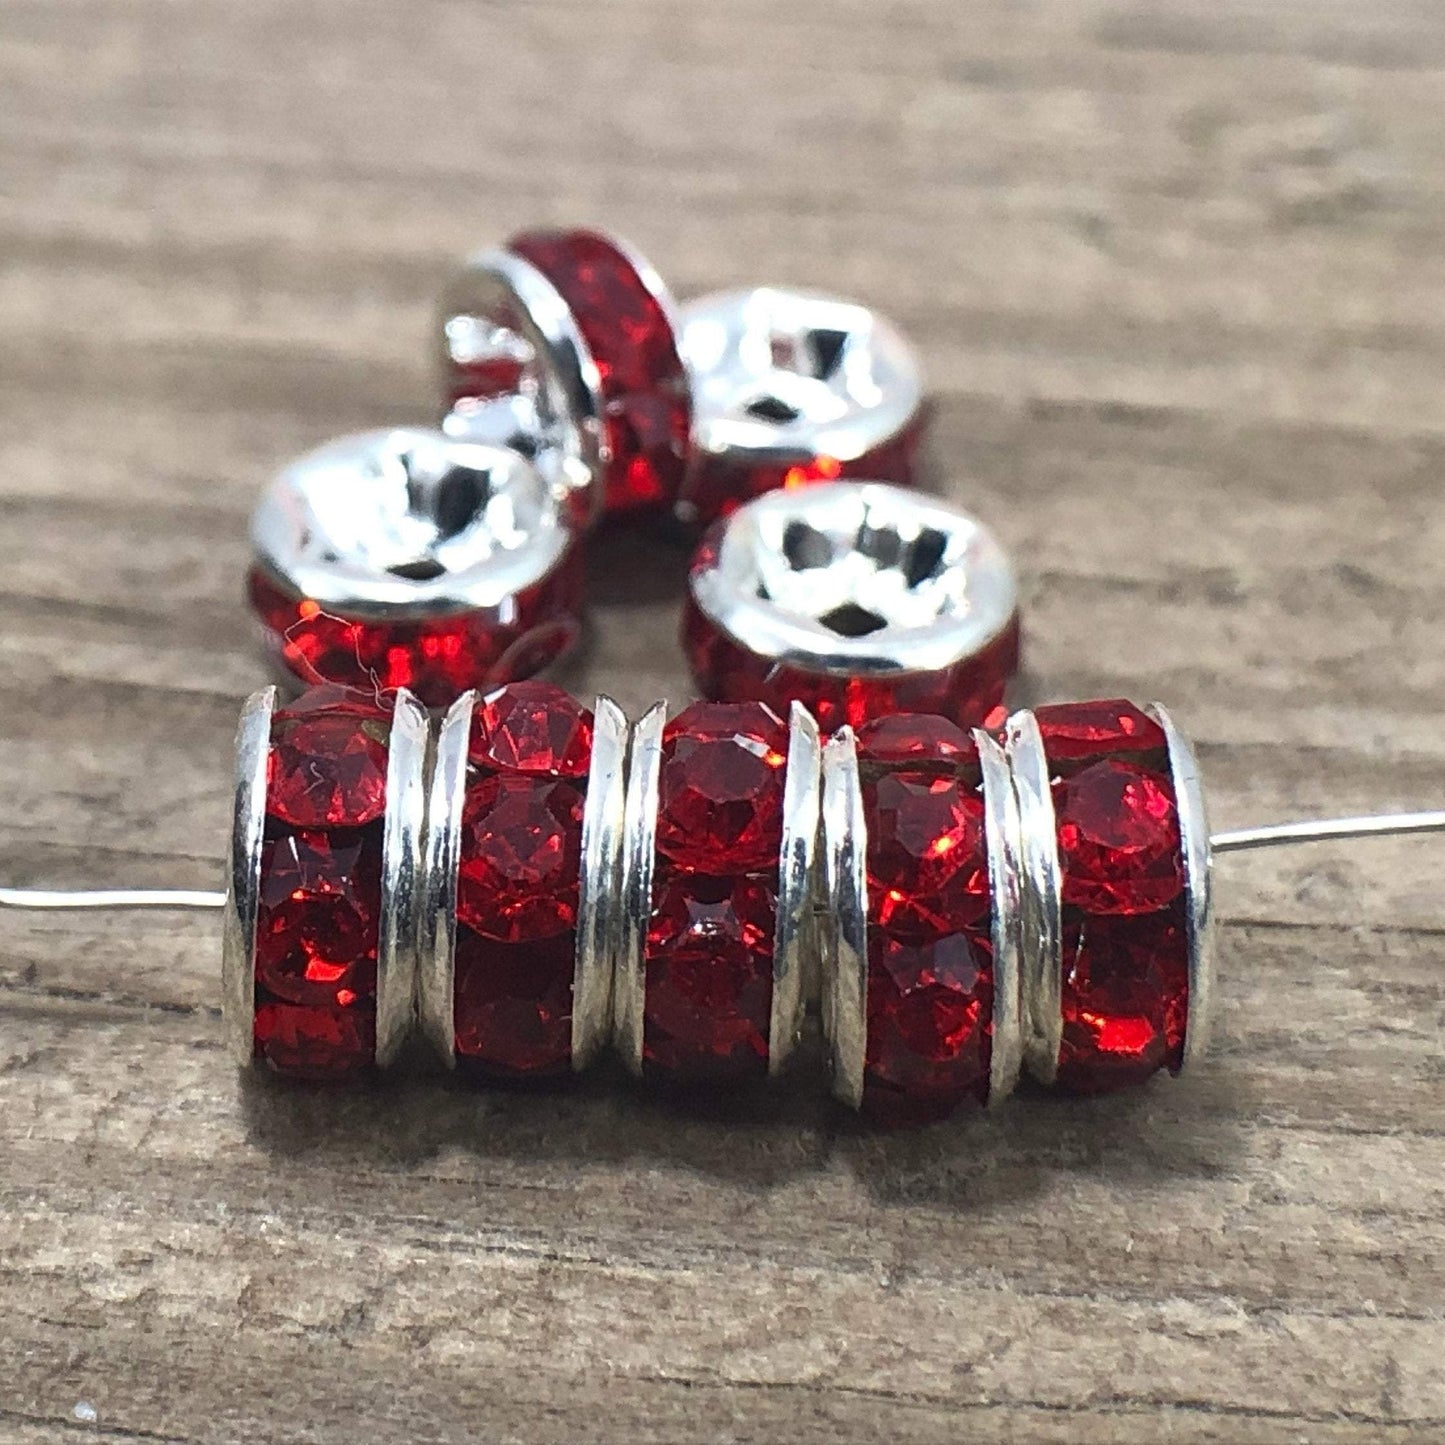 Siam Czech Crystal Rhinestone Silver Rondelle Spacer Beads, 100pcs 4mm 5mm 6mm 8mm 10mm, beadig, jewelry making, Craft Supplies, Findings 